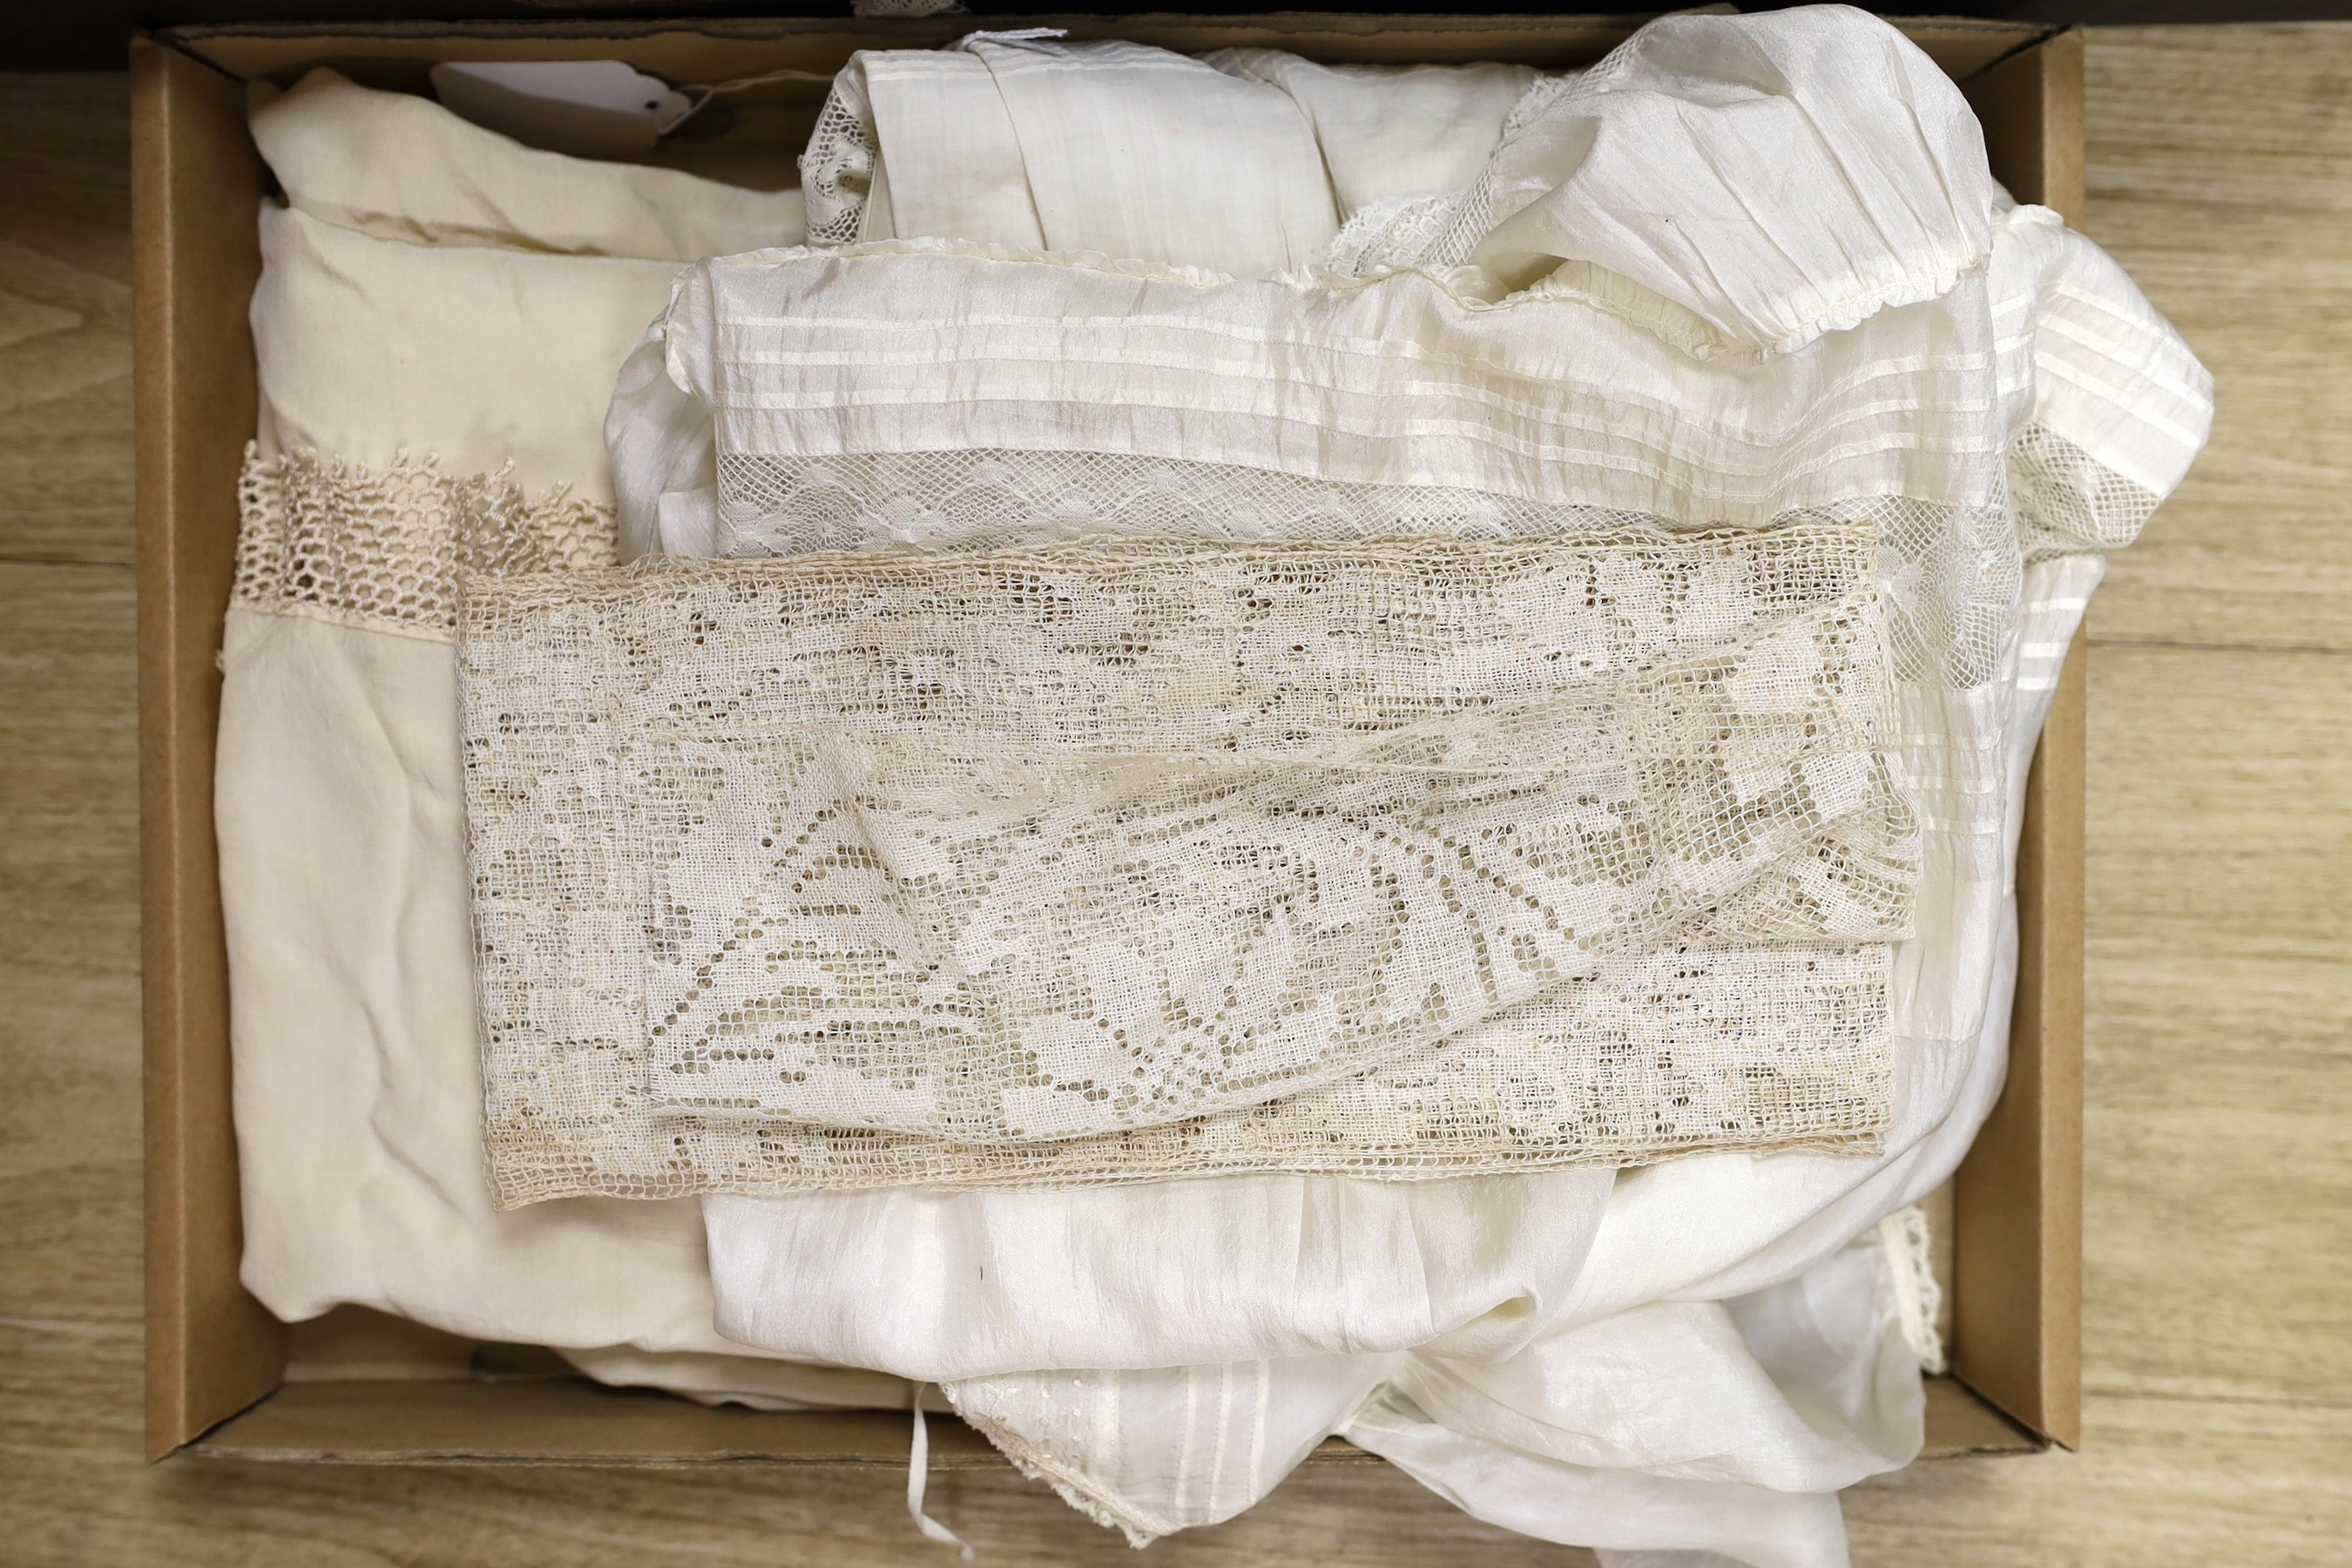 A quantity of mixed machine and some handmade lace including Irish crochet, together with a white work petticoat, silk christening gown and a silk shawl